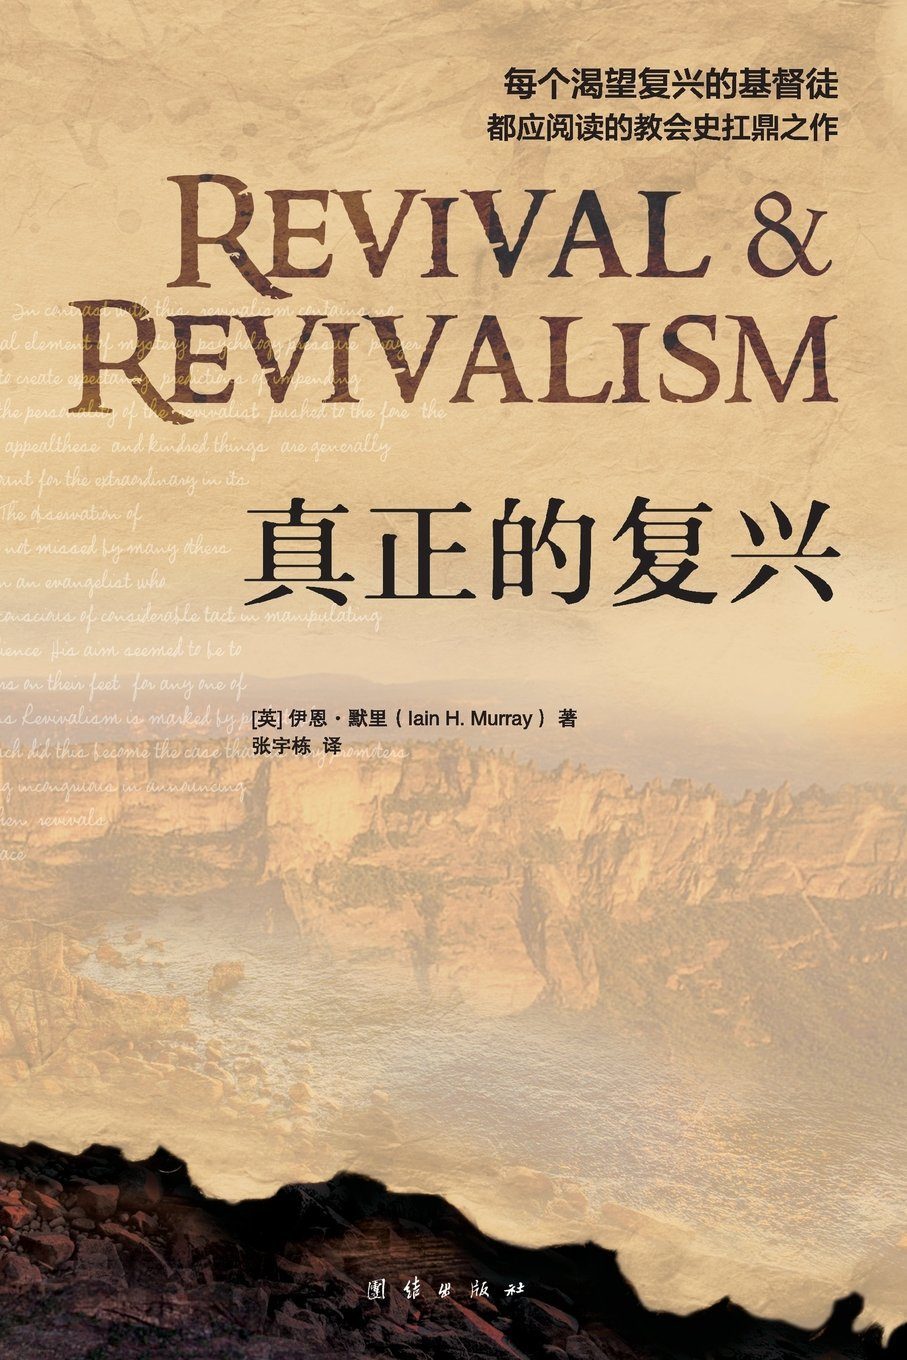 cover image for 'Revival and Revivalism' (Chinese) by Iain Murray